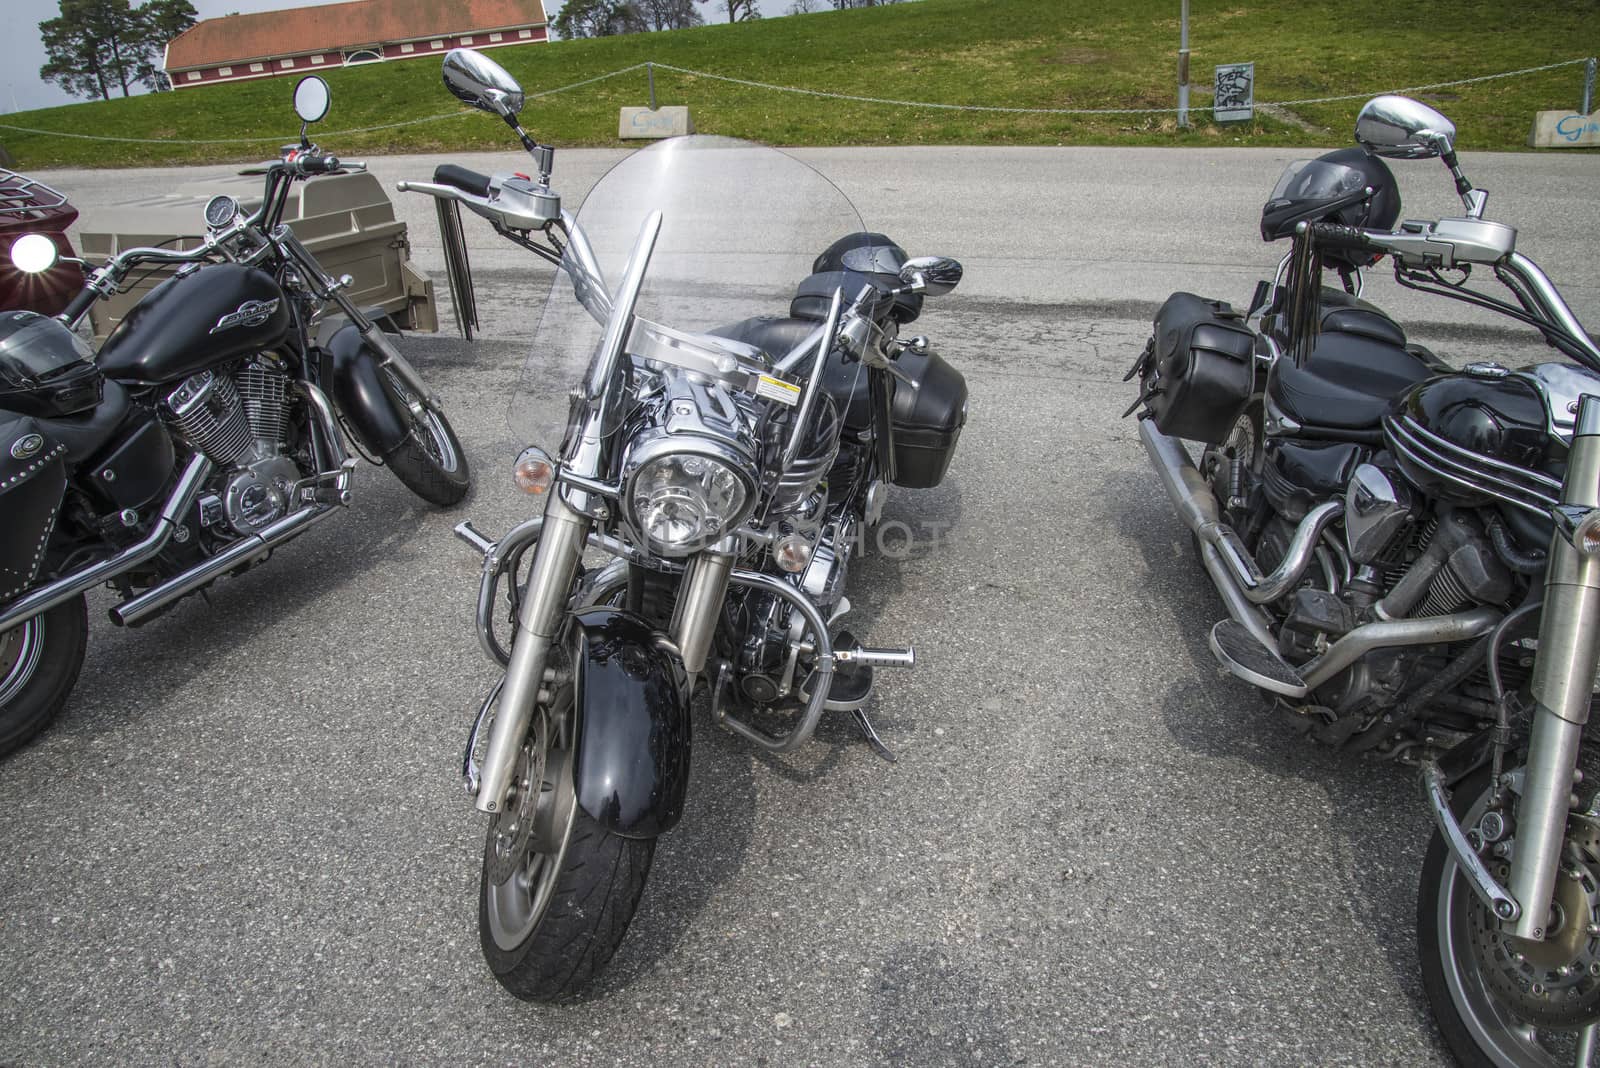 Every year in May there is a motorcycle meeting at Fredriksten fortress in Halden, Norway. In this photo, Yamaha Roadliner